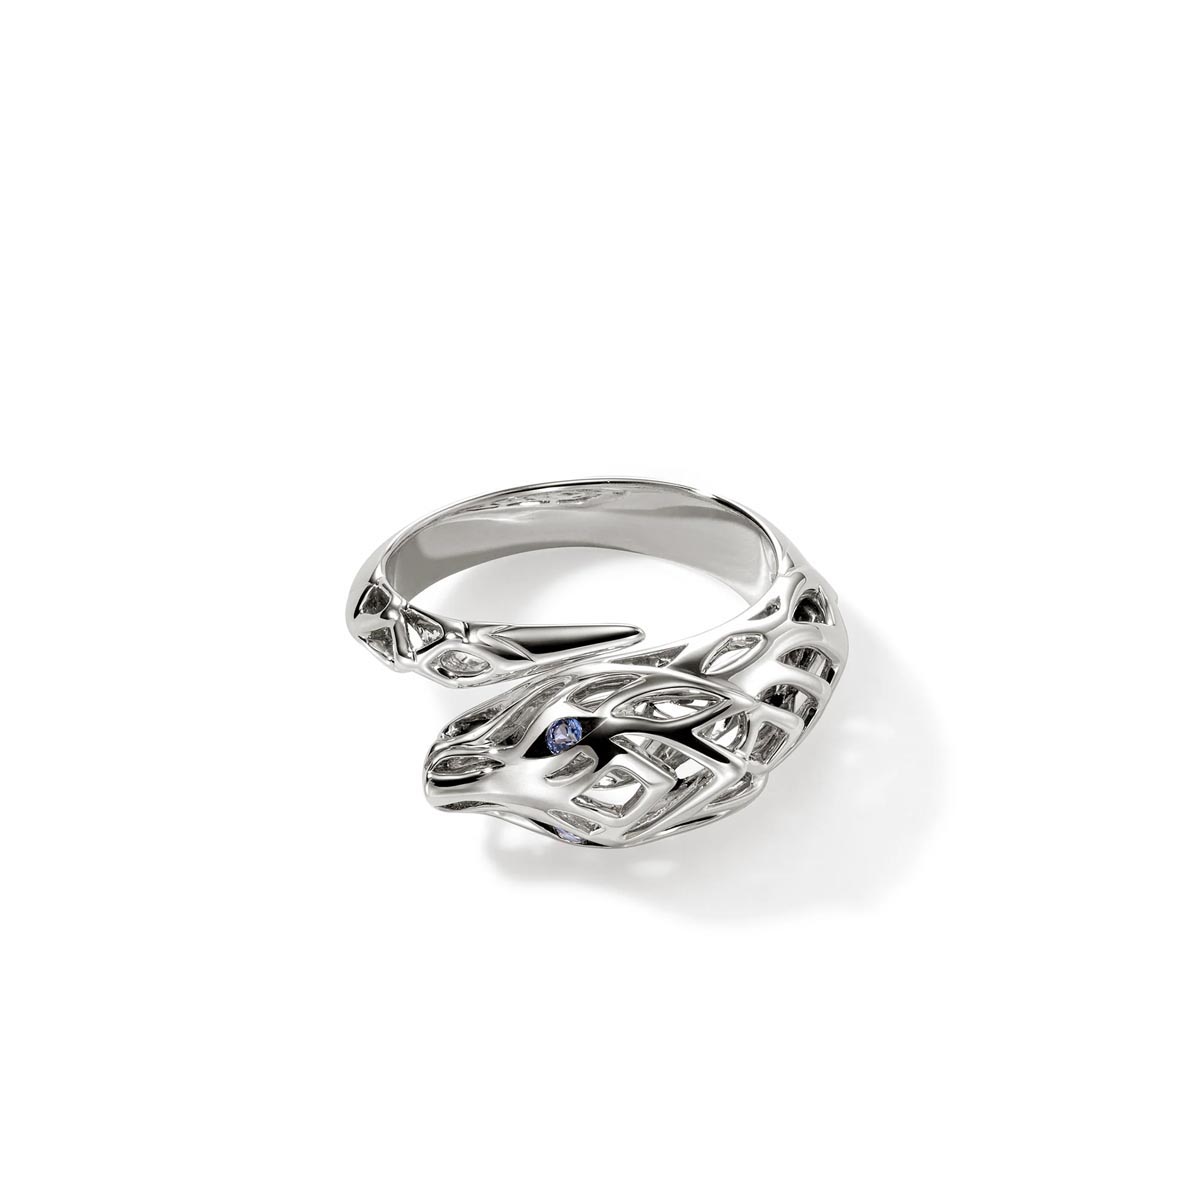 John Hardy Legends Naga Bypass Sapphire Ring in Sterling Silver